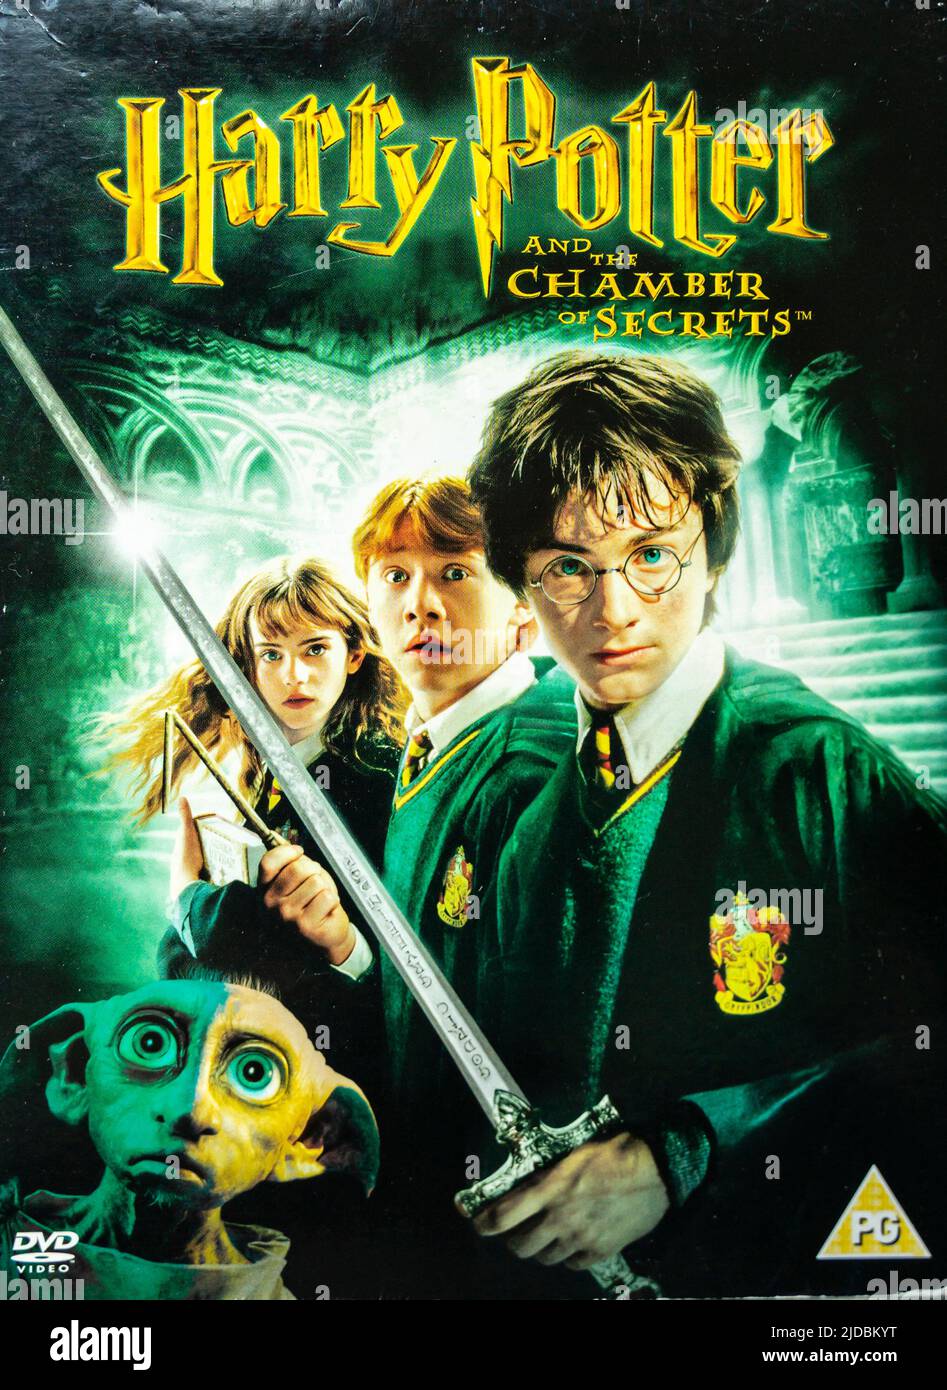 Buy Harry Potter and the Prisoner of Azkaban/Harry Pot DVD Double Feature  DVD